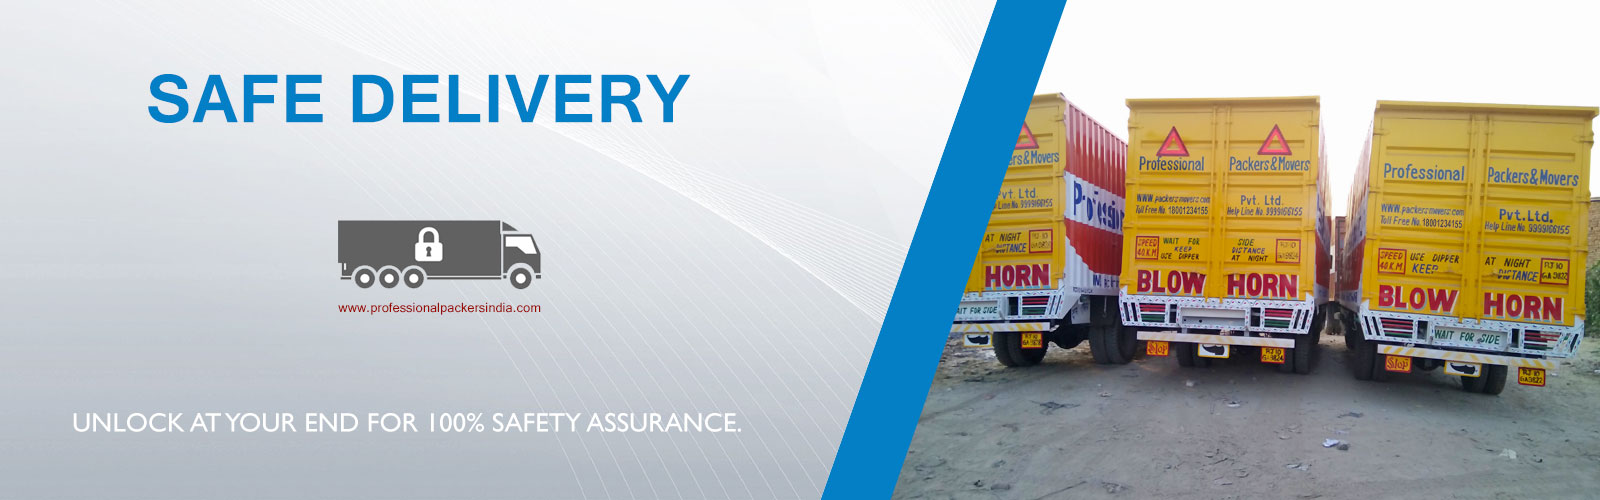 Movers Packers Dakshinpuri Delhi company move your belongings fast and in an efficient manner by integrating top-notch packaging material, dedicated staff and global-class technology.